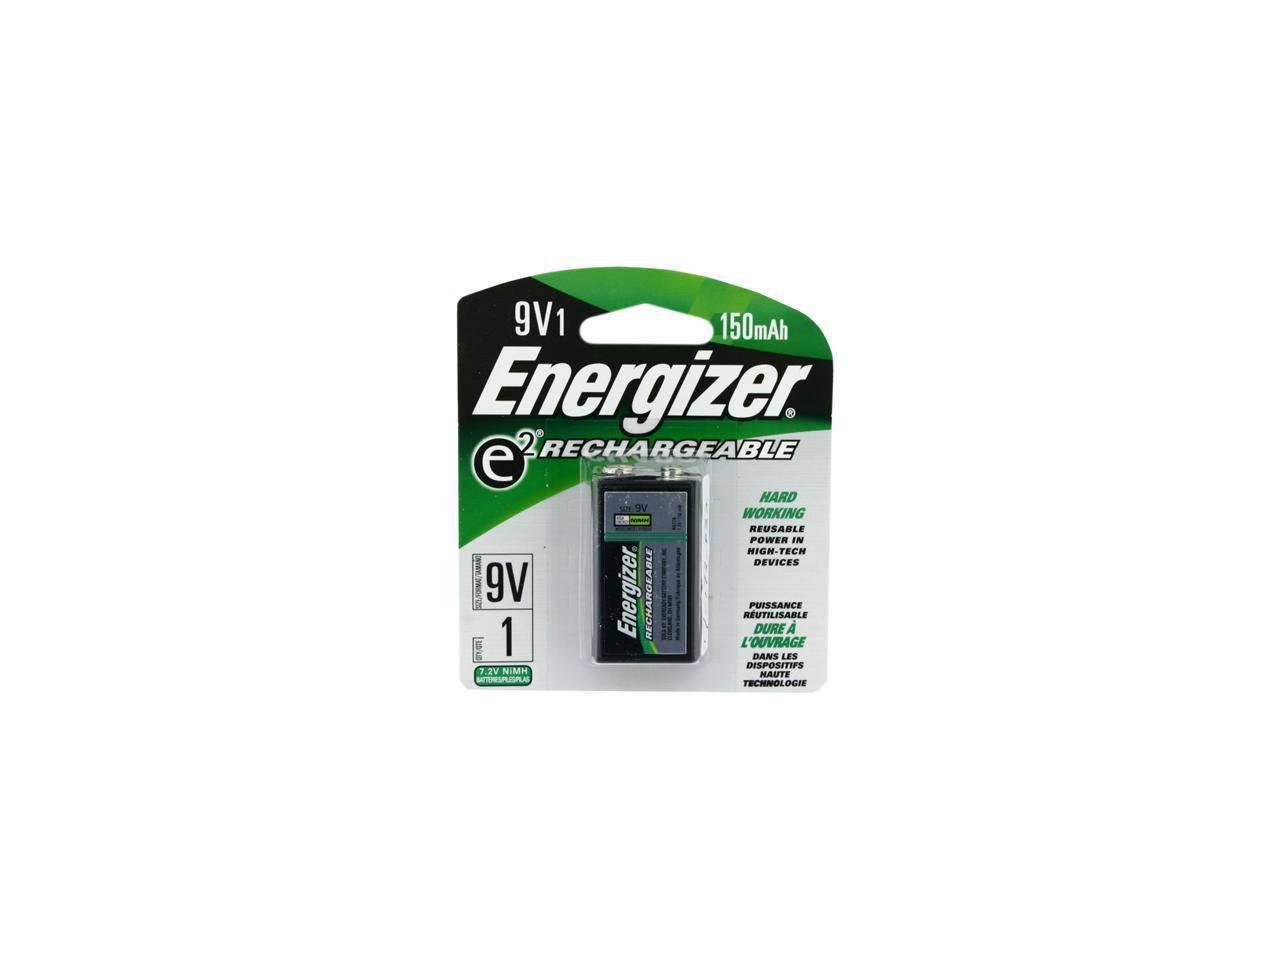 ENERGIZER e2 Rechargeable 9V 150mAh Ni-MH Rechargeable Battery, 1-Pack